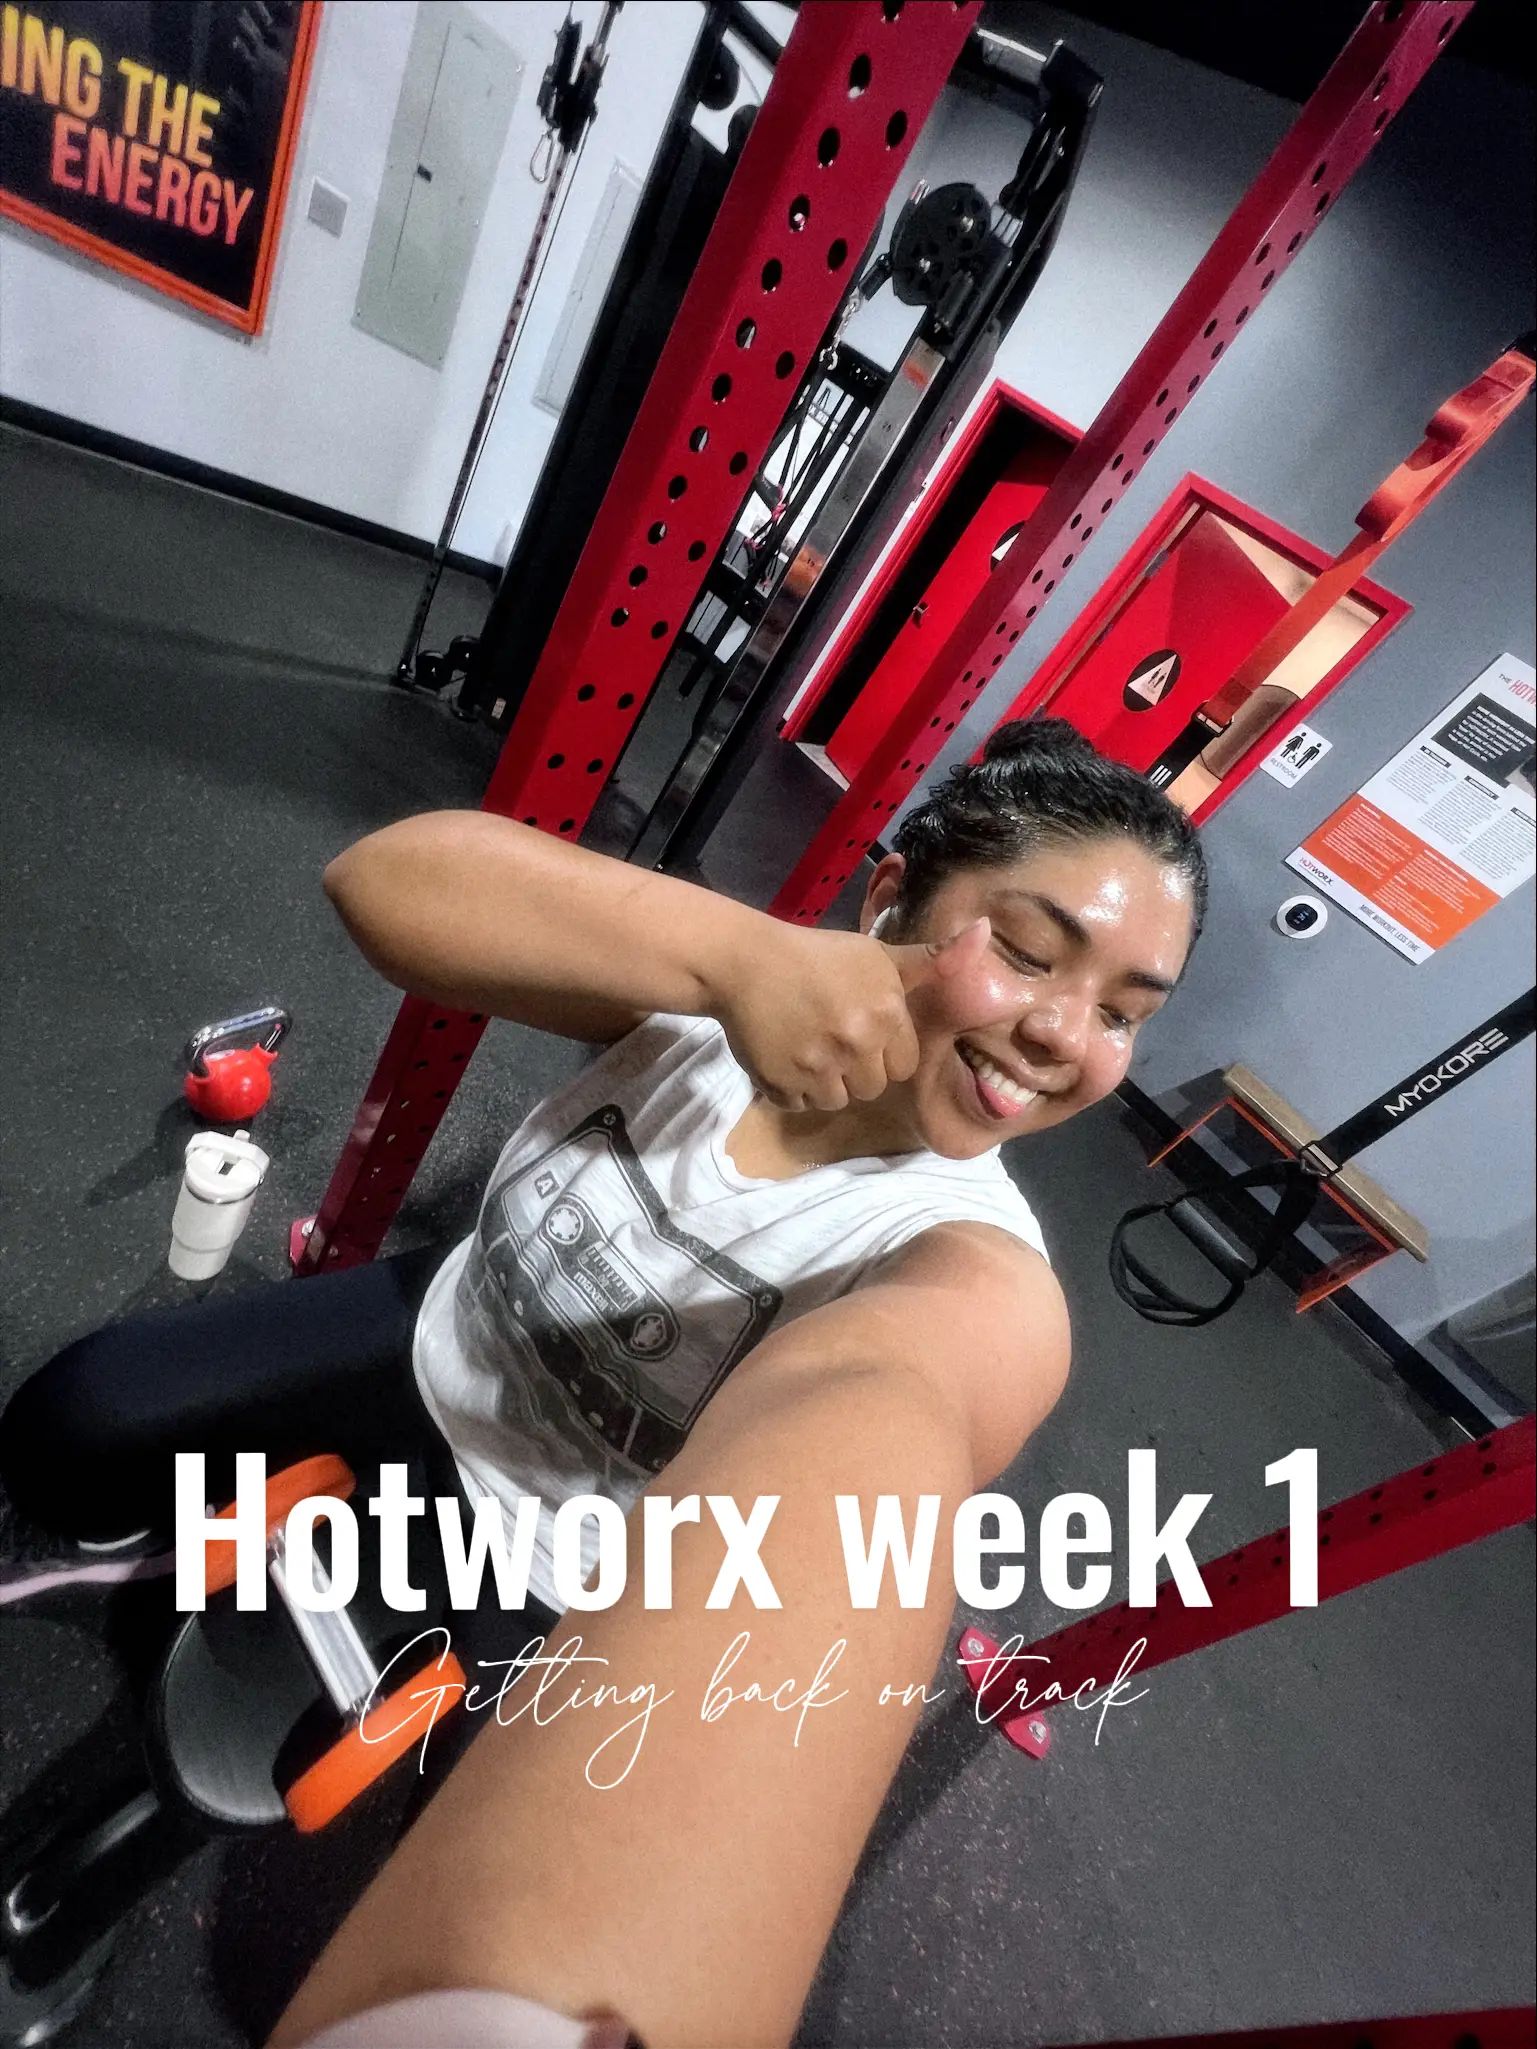 hotworx made me love working out 🔥, Gallery posted by Haley True